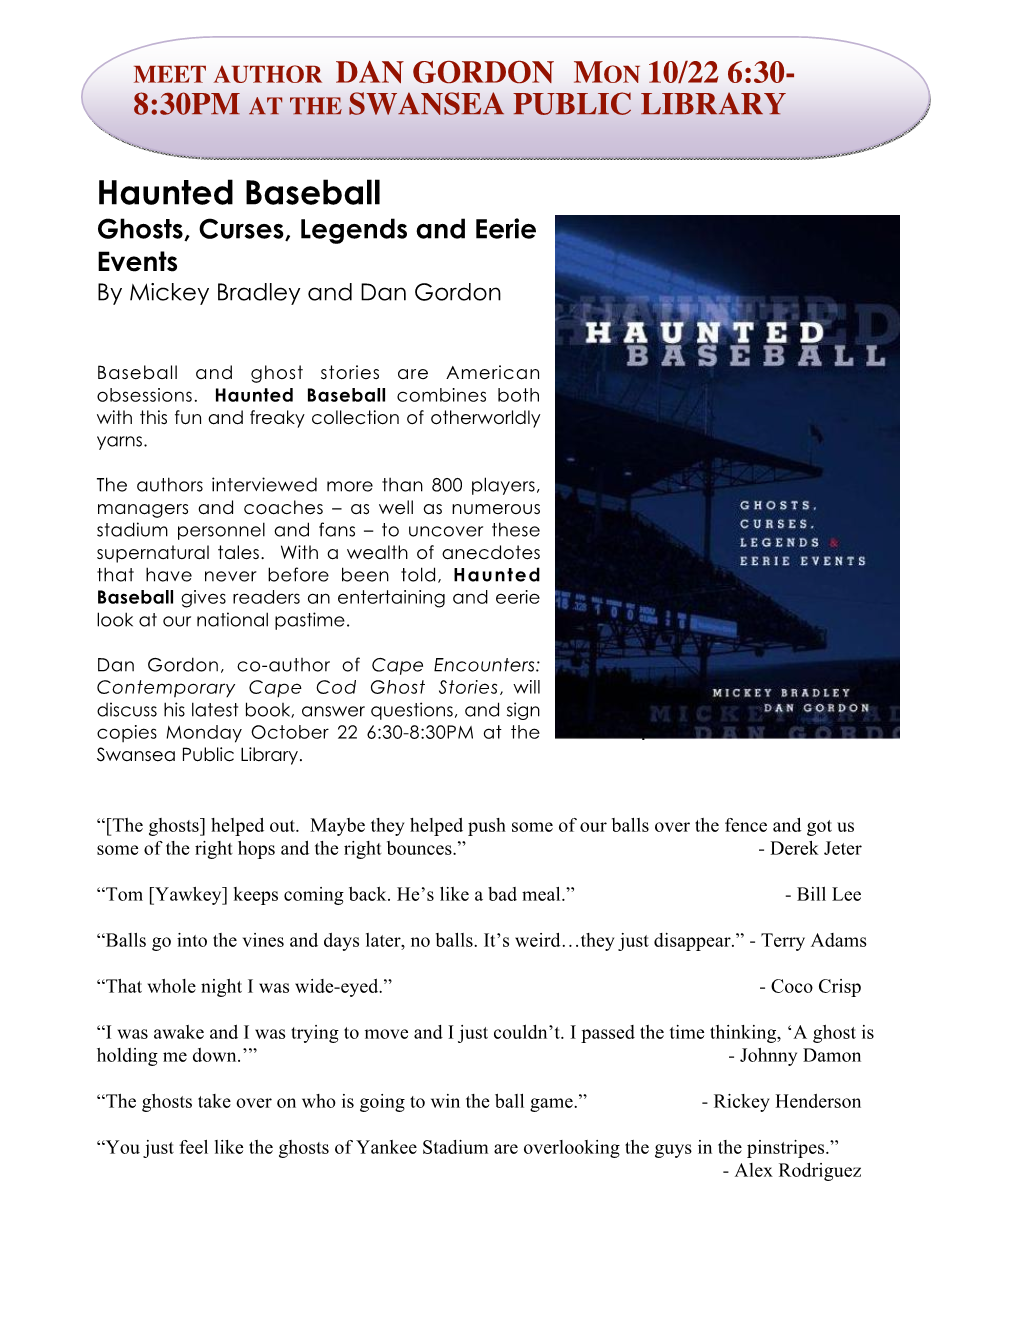 Haunted Baseball Ghosts, Curses, Legends and Eerie Events by Mickey Bradley and Dan Gordon